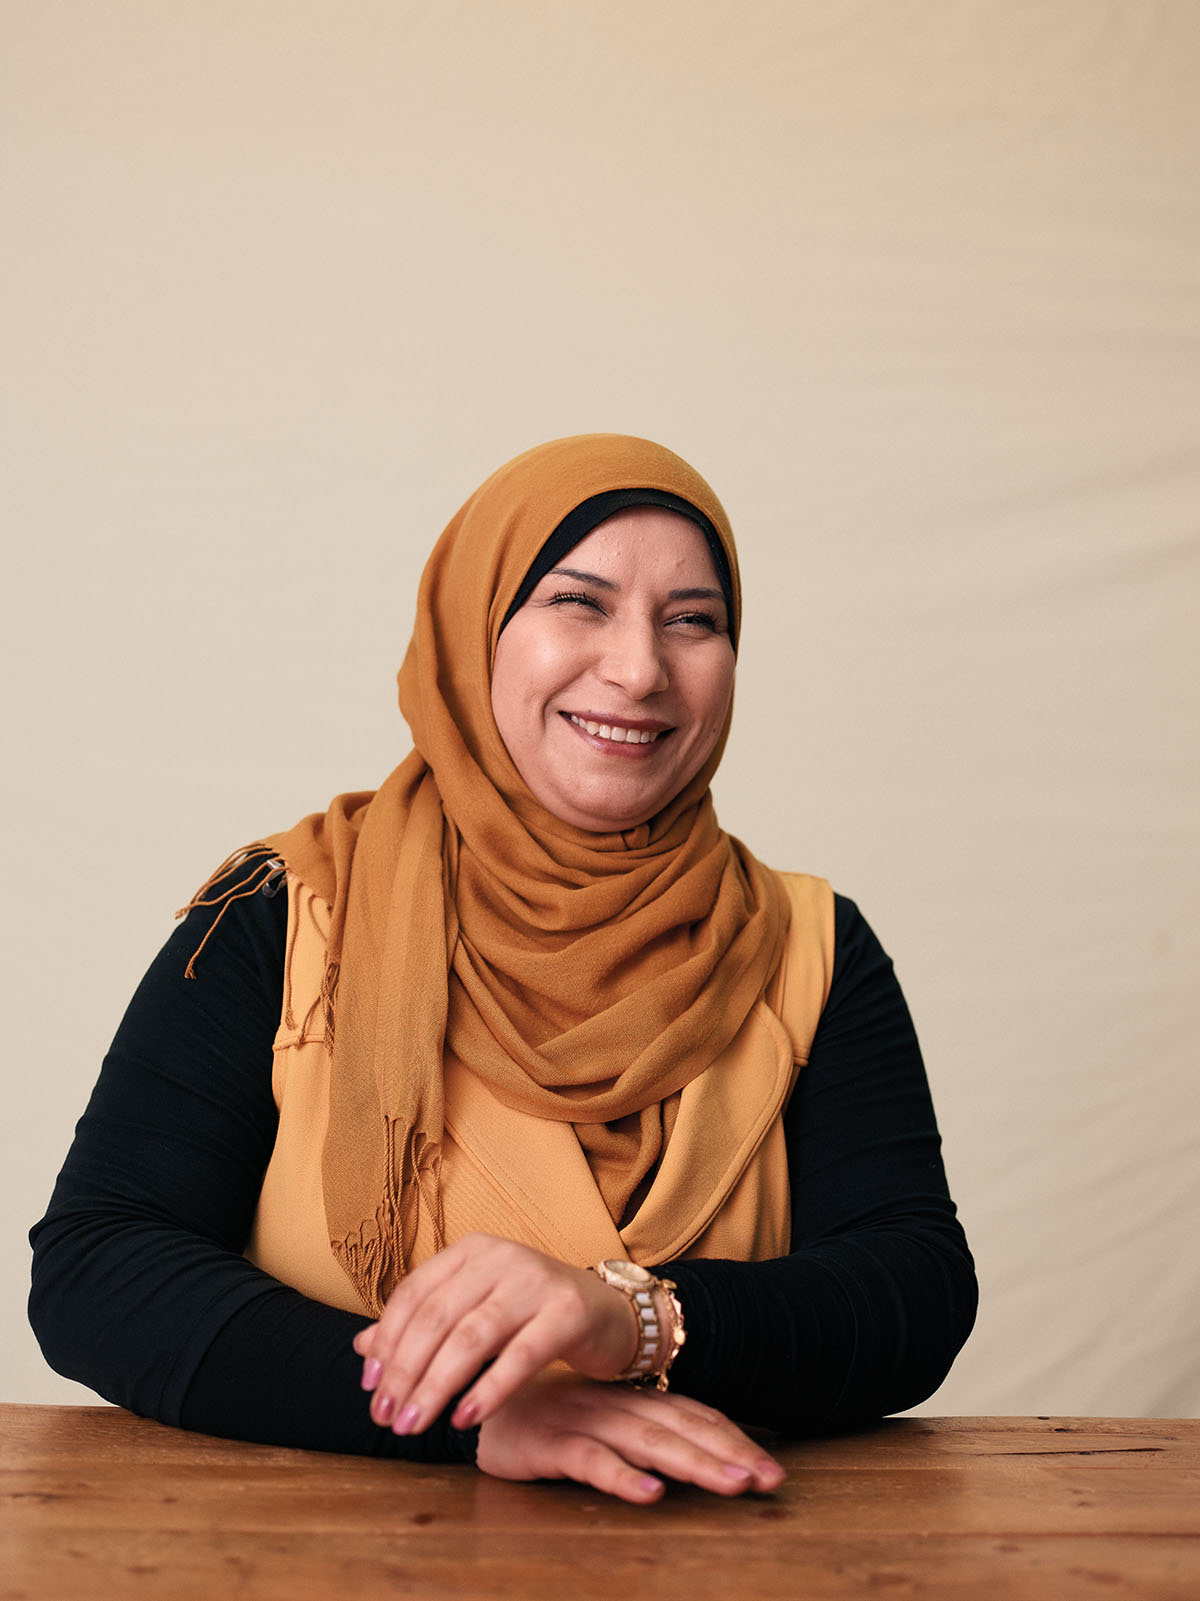 A woman in a gold-colored hijab smiles and moves to fold her hands